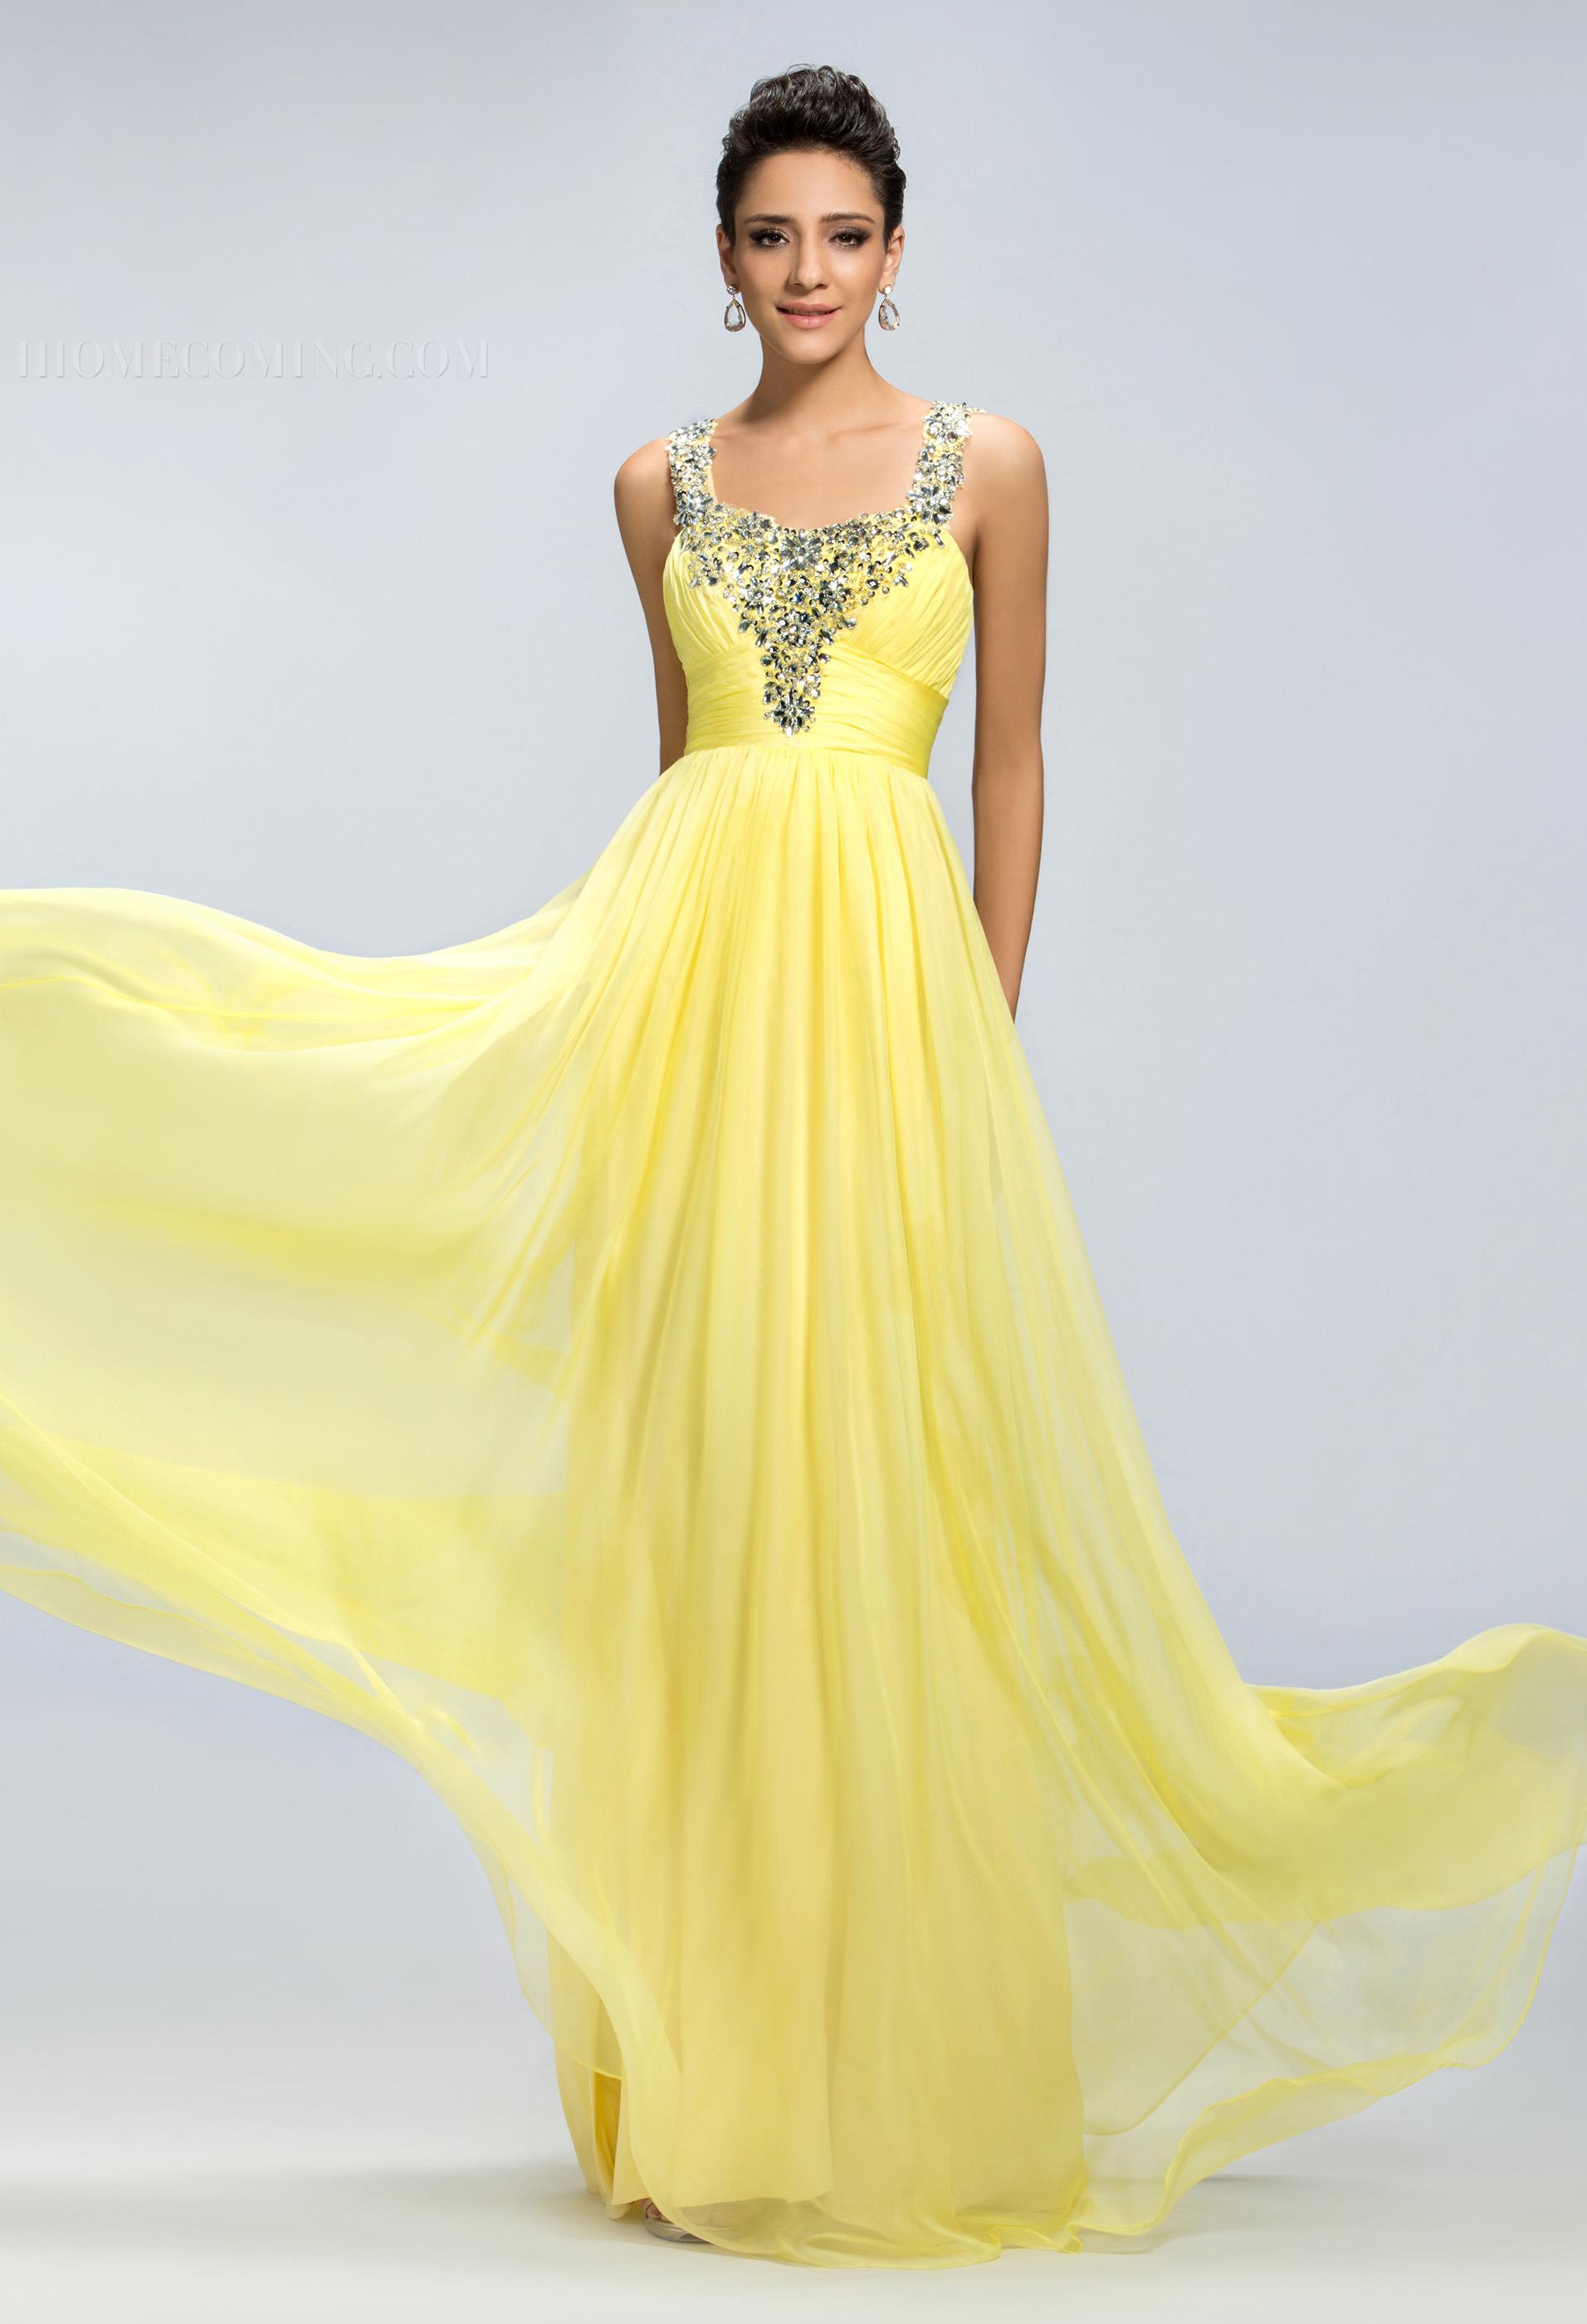 Read these Tips Before Buying Evening Dresses - Leisure and Me